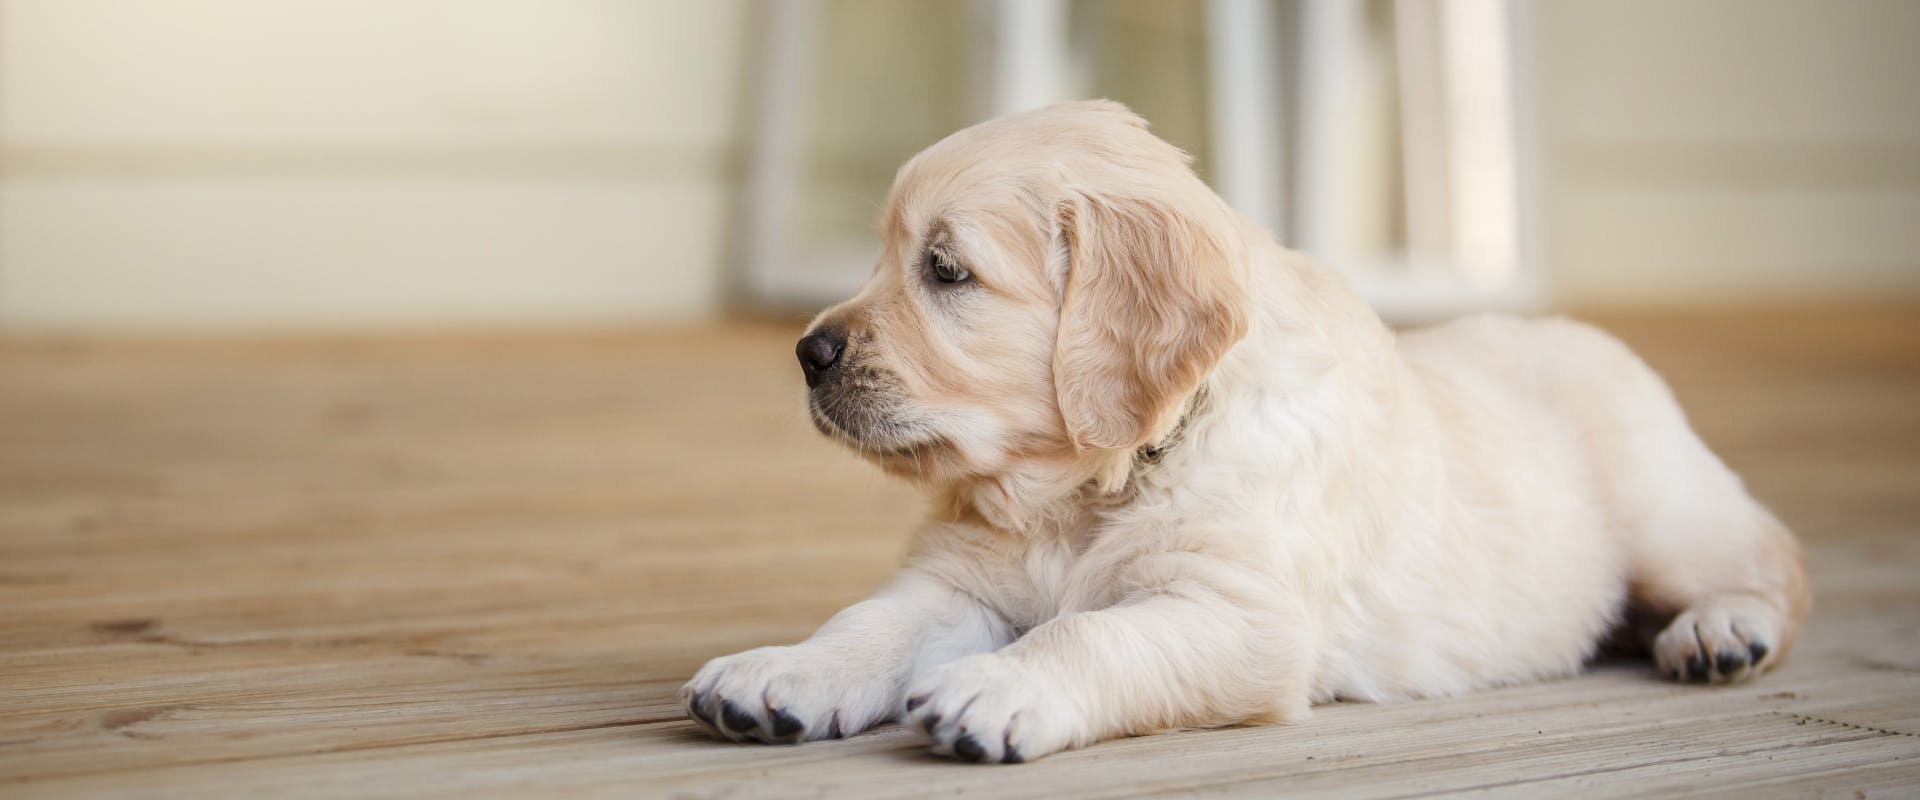 a golden retriever puppy lying on a hardwood floor looking off to the left